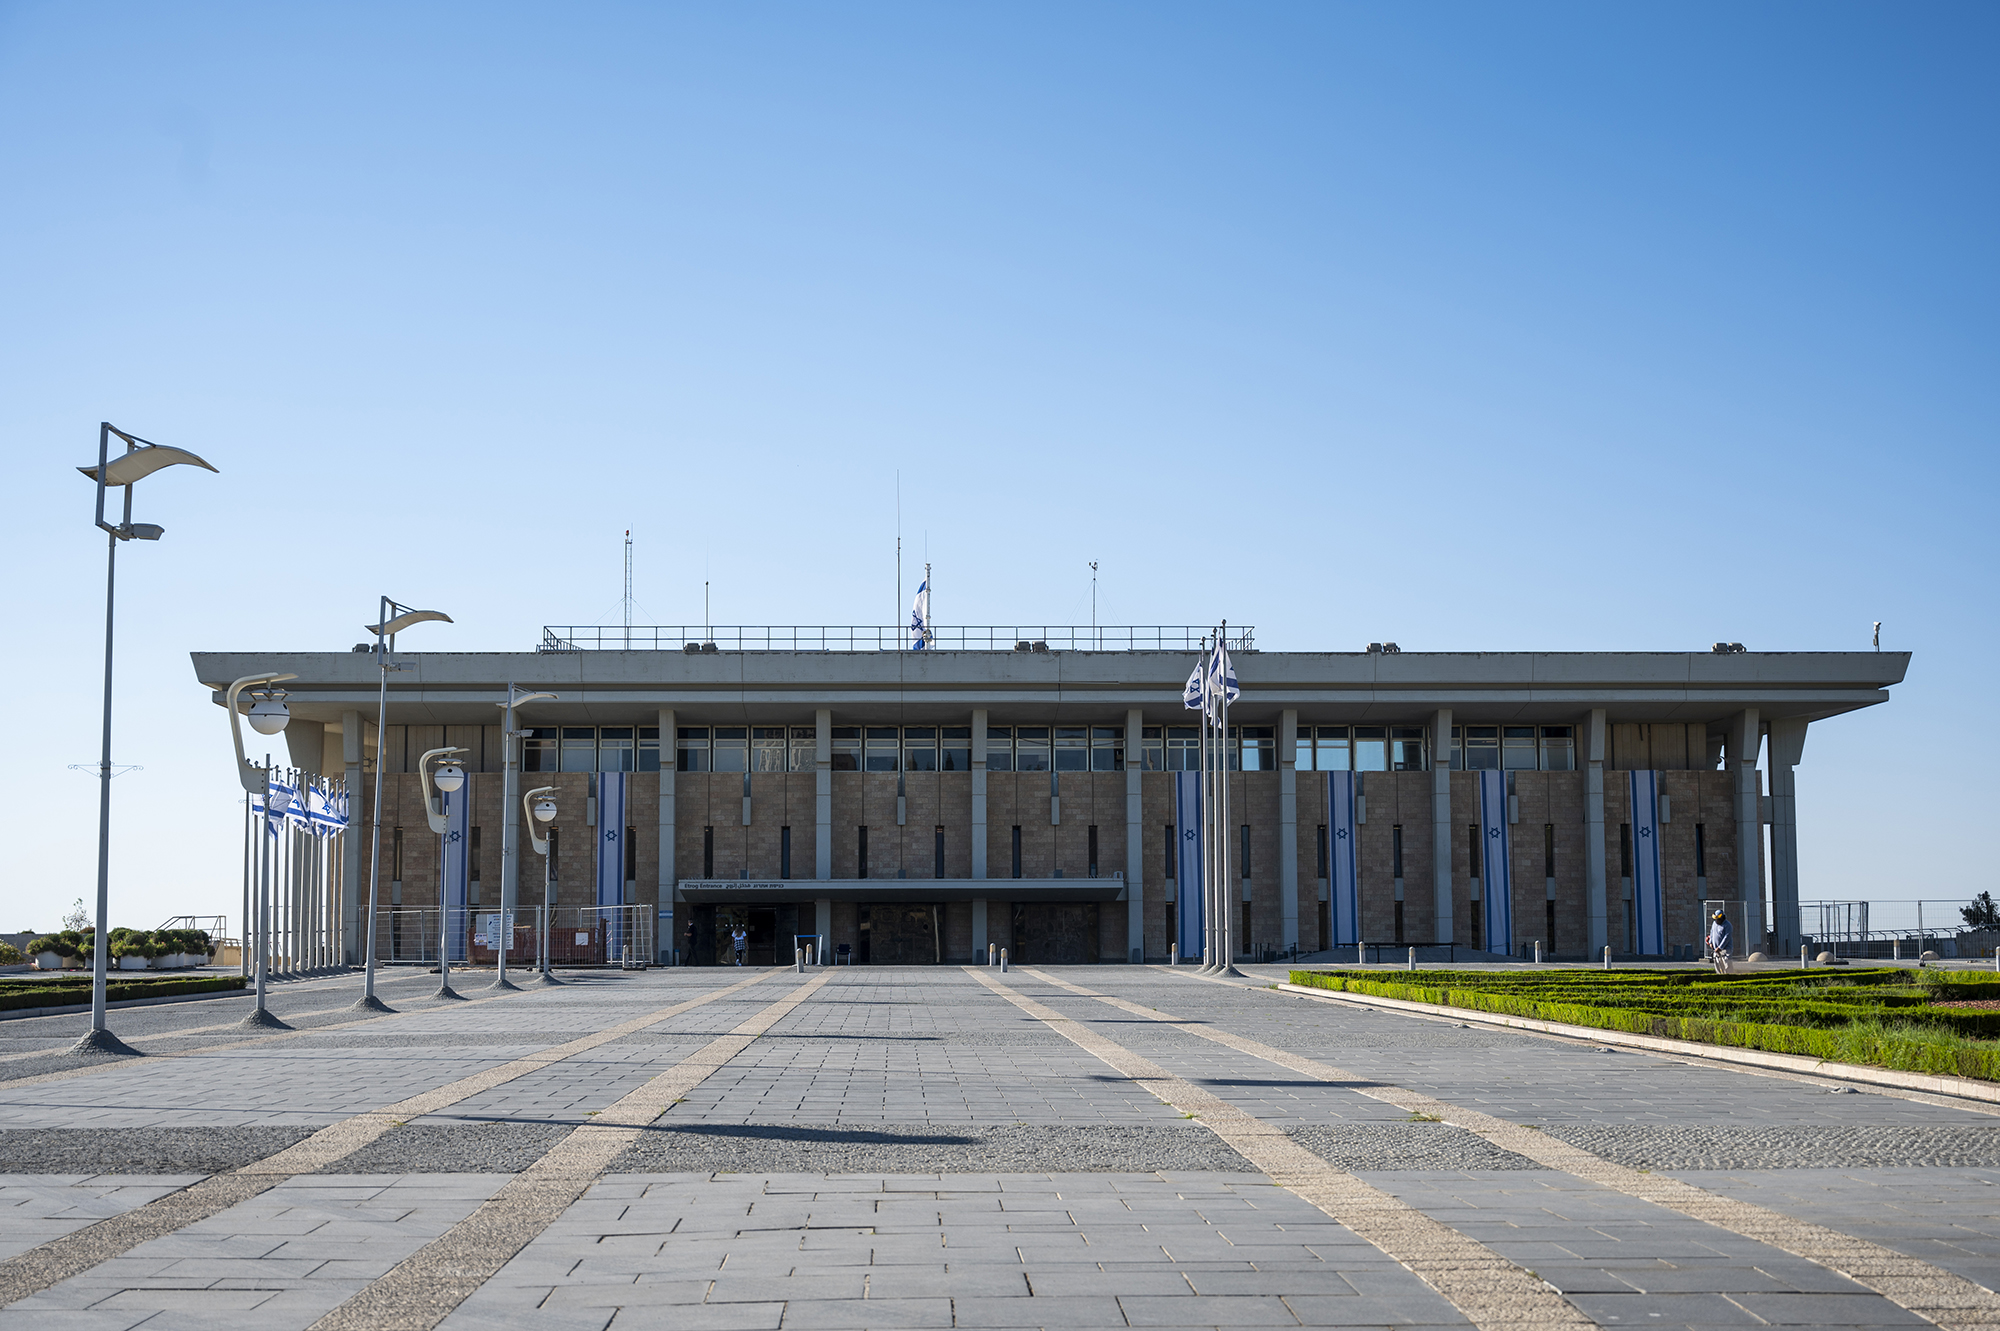 Israeli flags fly in front of the Knesset, the unicameral parliament of the State of Israel, on September 11, 2022